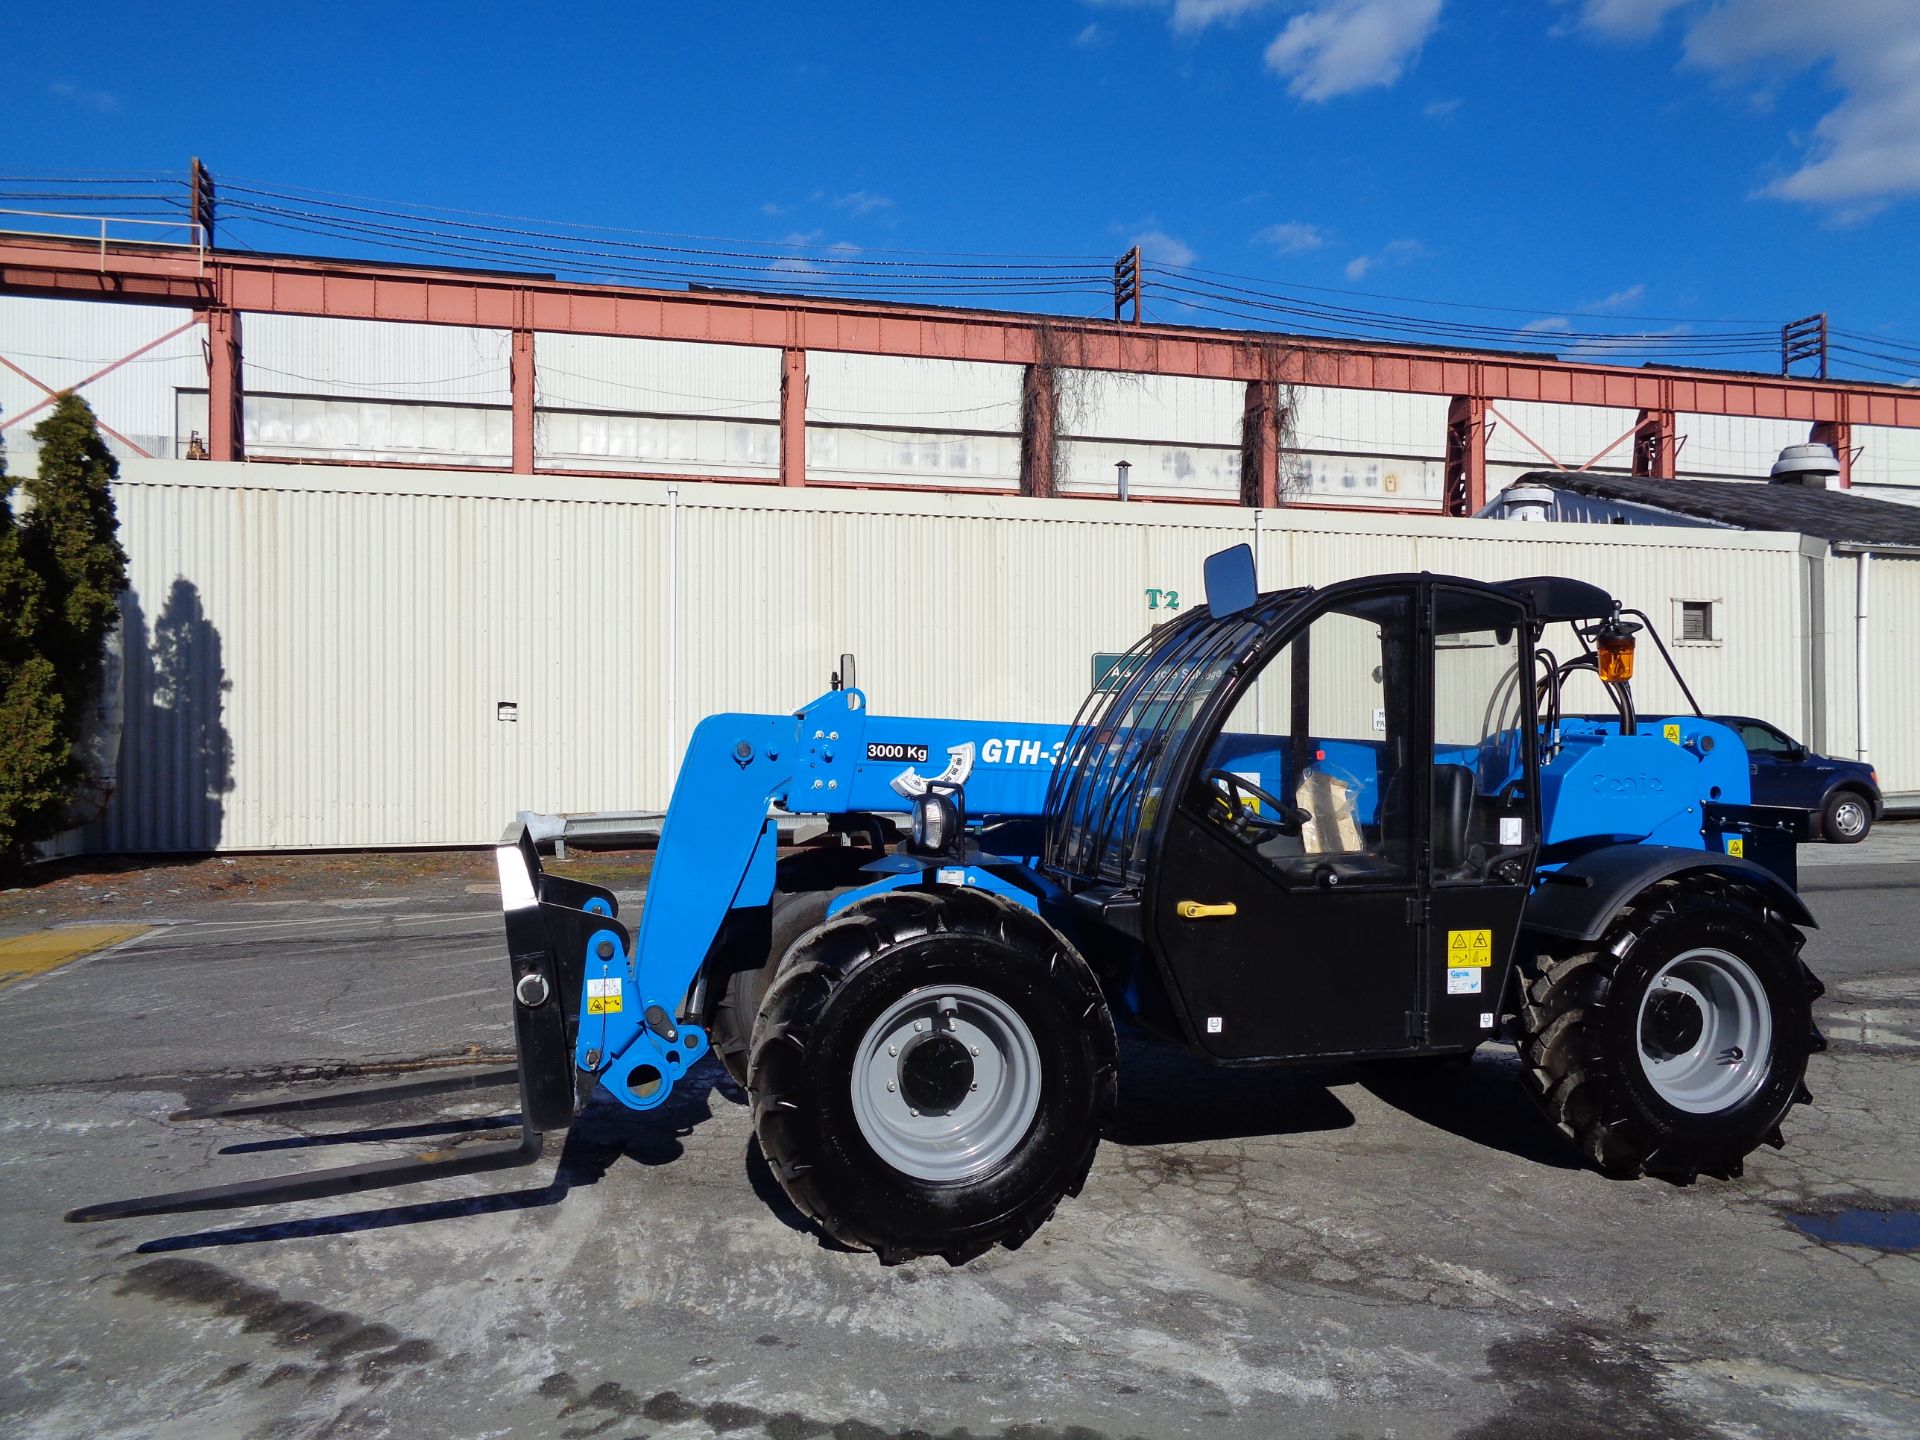 New Unused 2018 Genie GTH3007 Telescopic Forklift 6,600 lbs - Enclosed Cab - Image 17 of 23